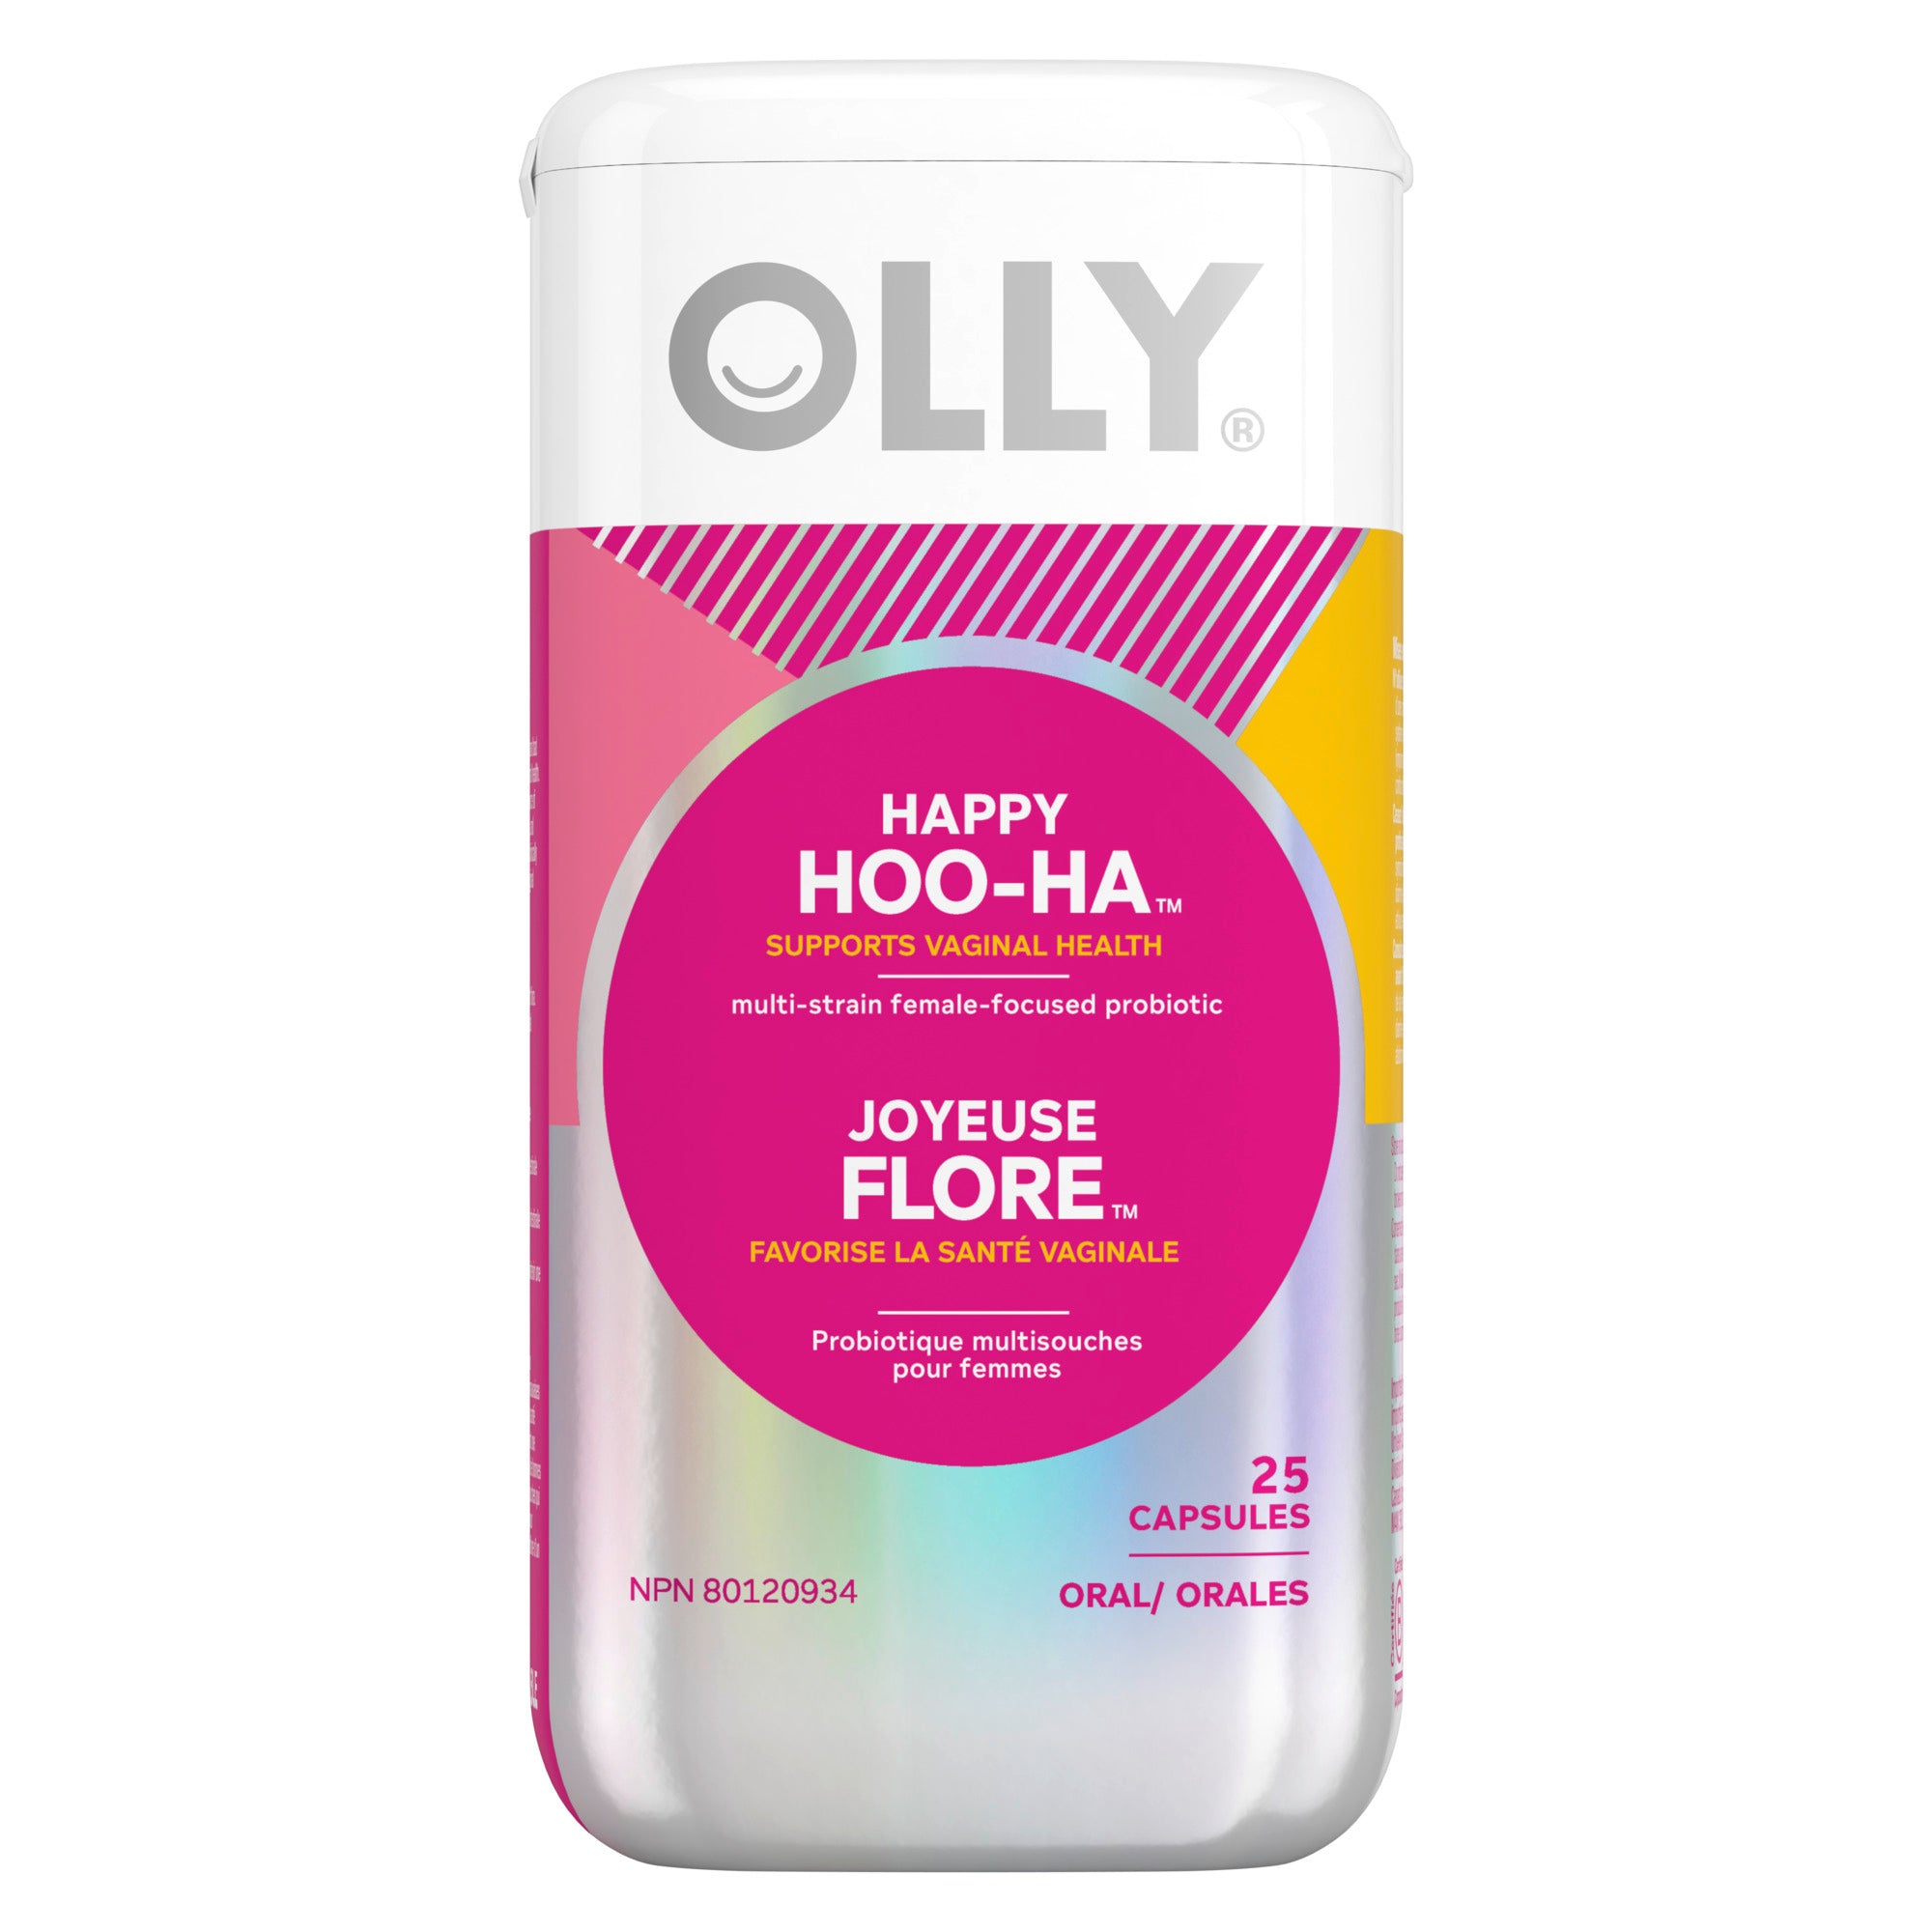 Front view of the OLLY® Happy HOO-HA Supplement Capsules, 25 count packaging.